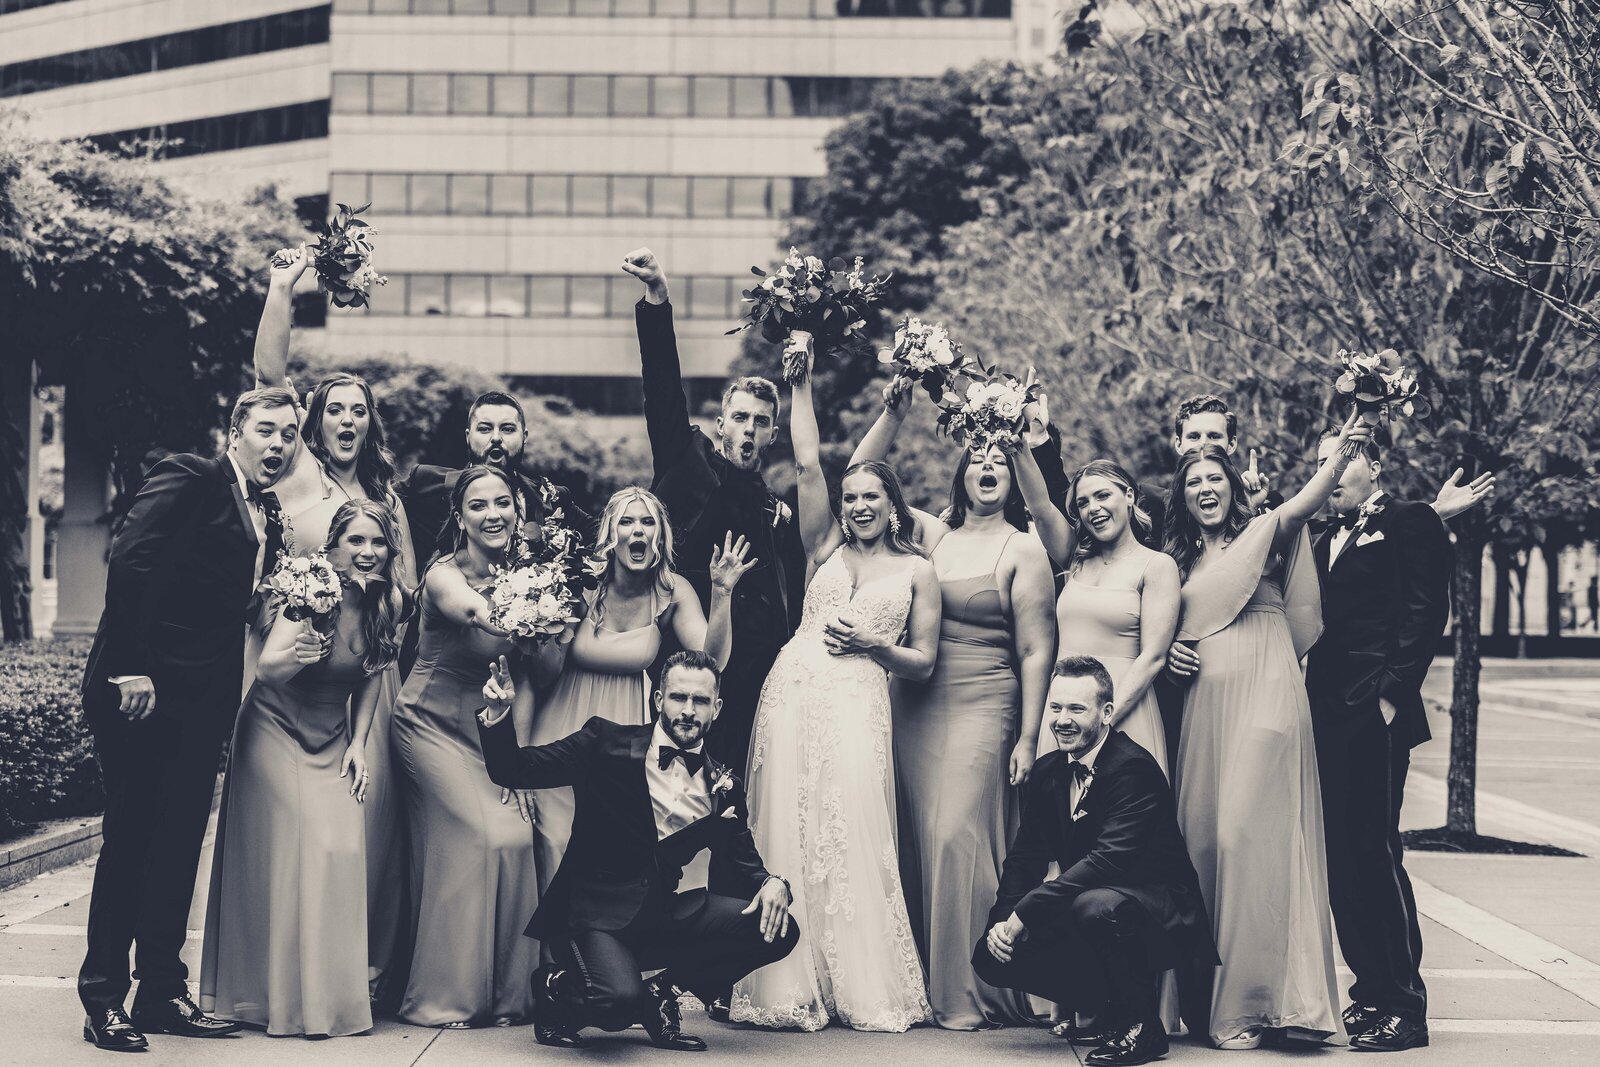 Celebrate the dynamic energy and vibrant spirit of Sandy and Jack’s bridal party with this incredible shot captured at P&G Gardens. The image features the entire group in a moment of pure joy and celebration, surrounded by the lush backdrop of the gardens. Perfect for couples seeking lively and colorful wedding photography, this photo captures the essence of a fun and unforgettable wedding day, showcasing how each member adds to the celebration’s excitement and style.